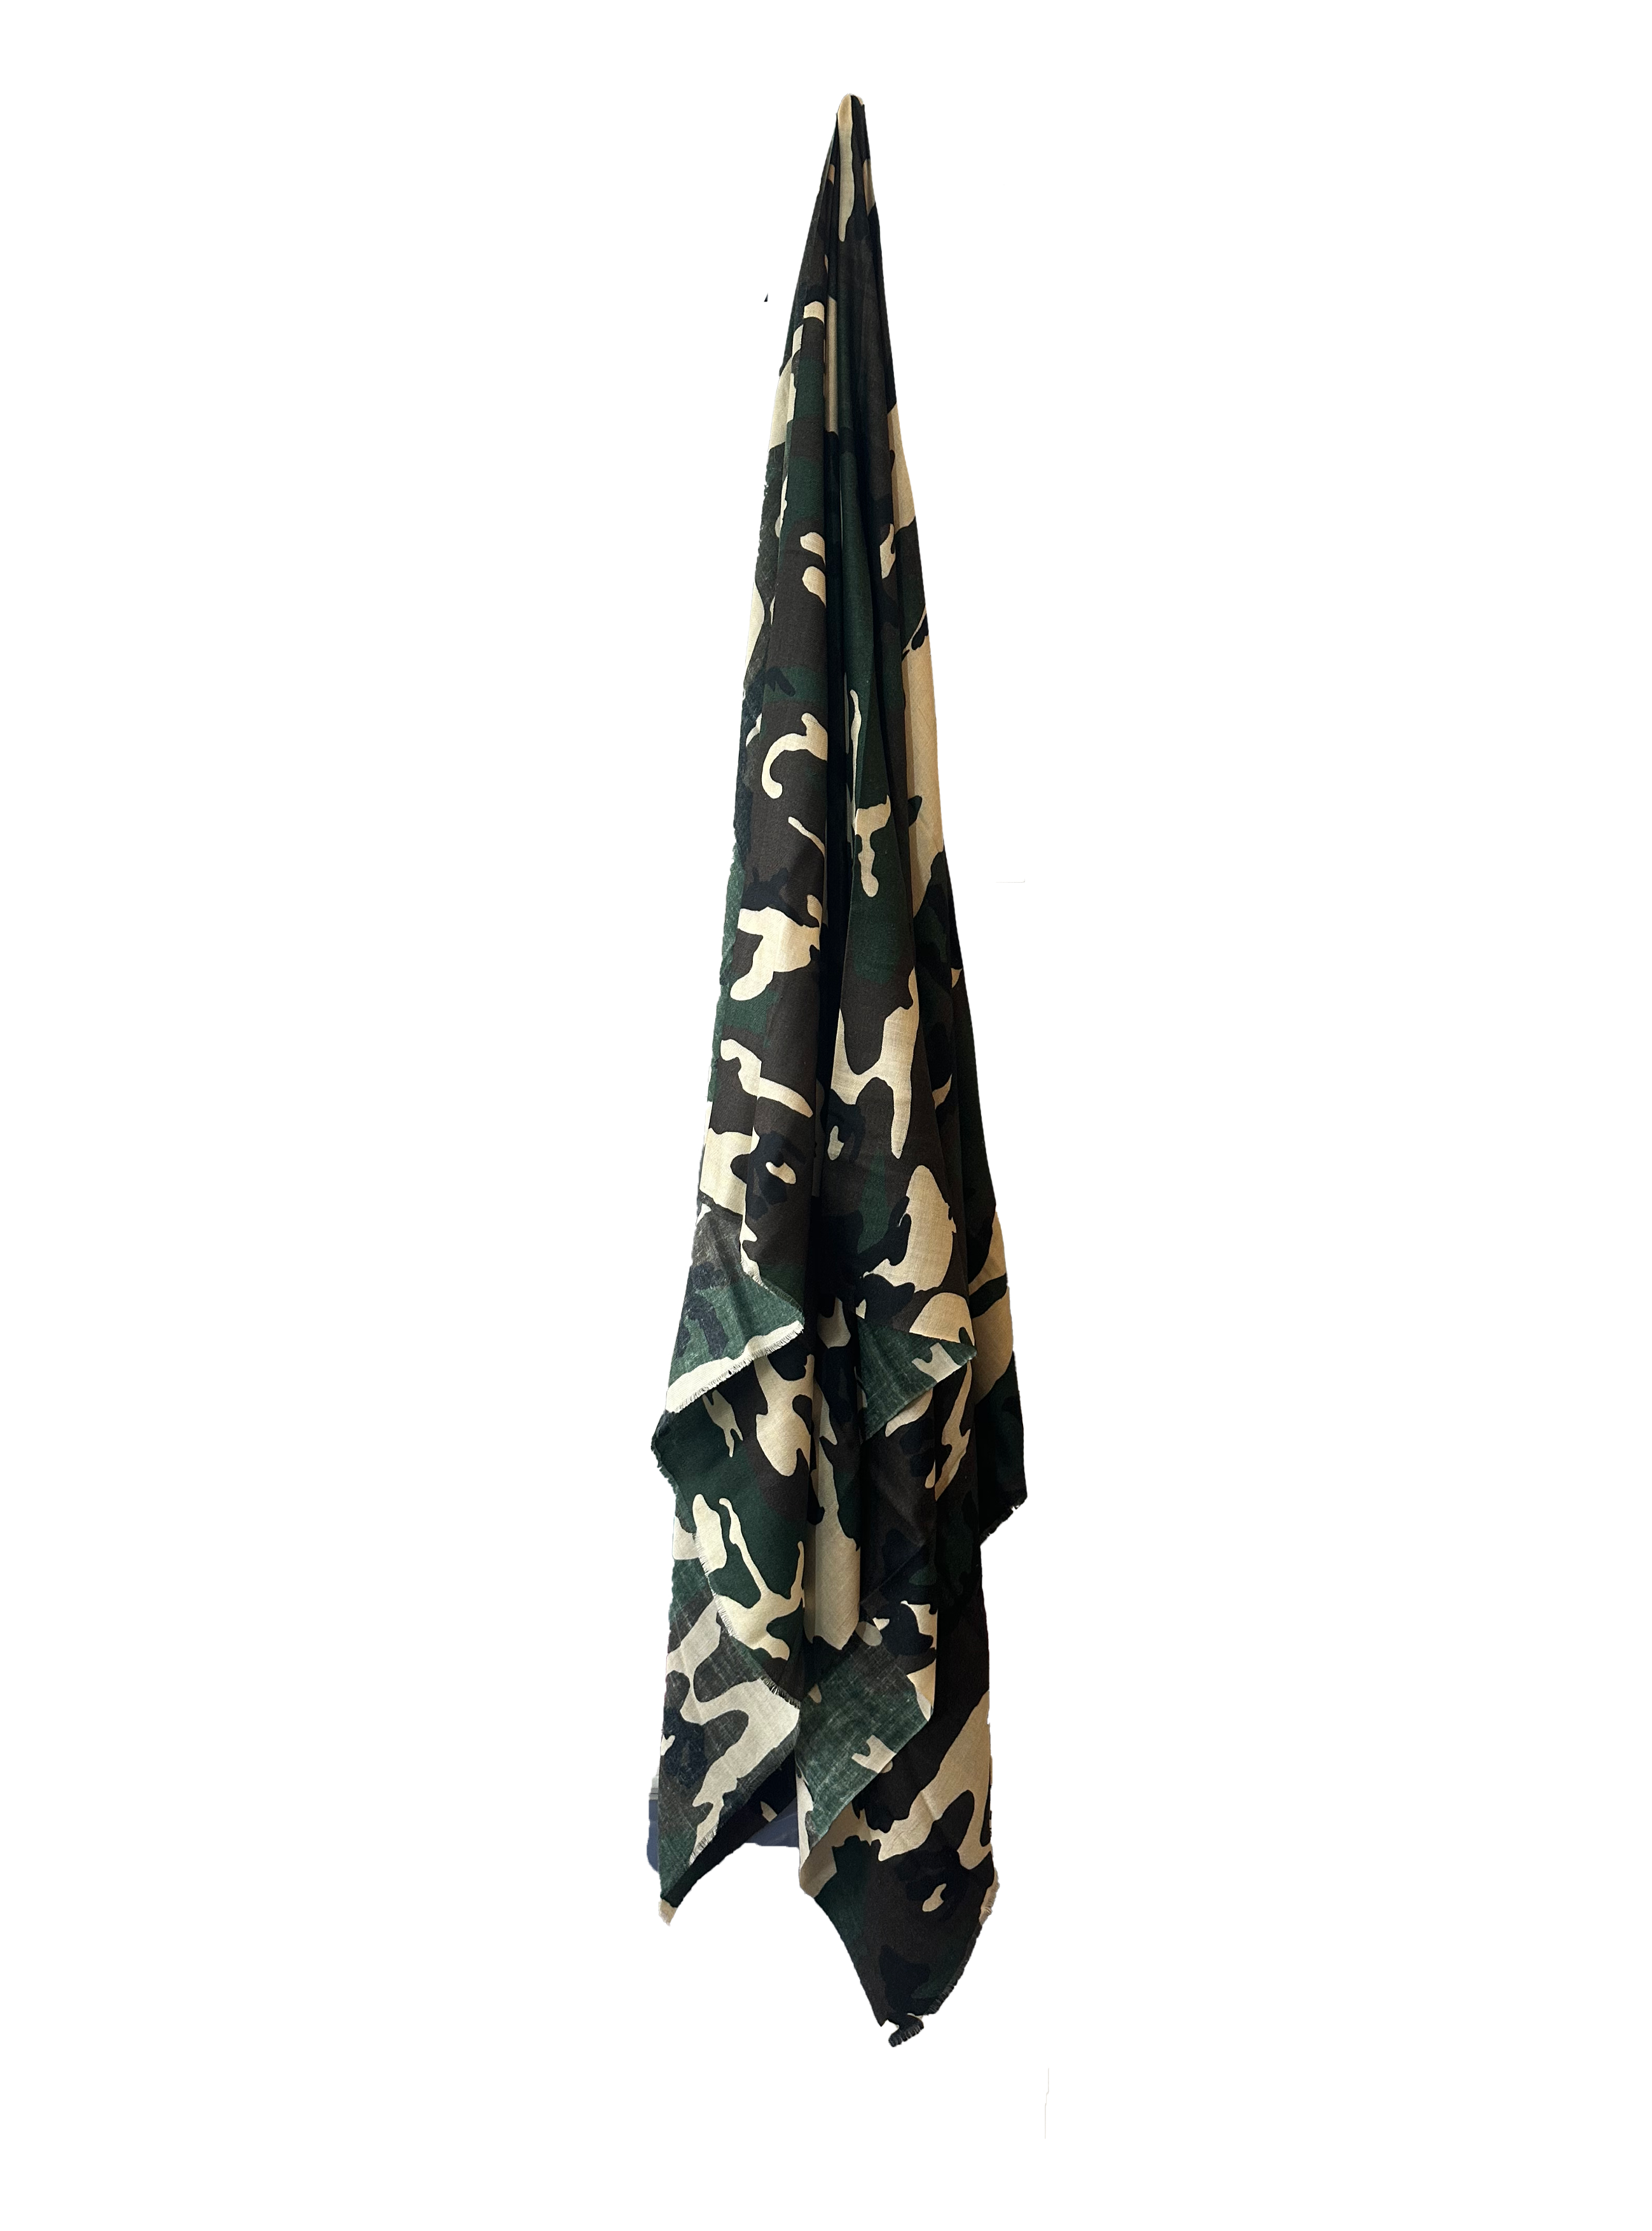 Camouflage Pashmina Shawl - Green and Brown